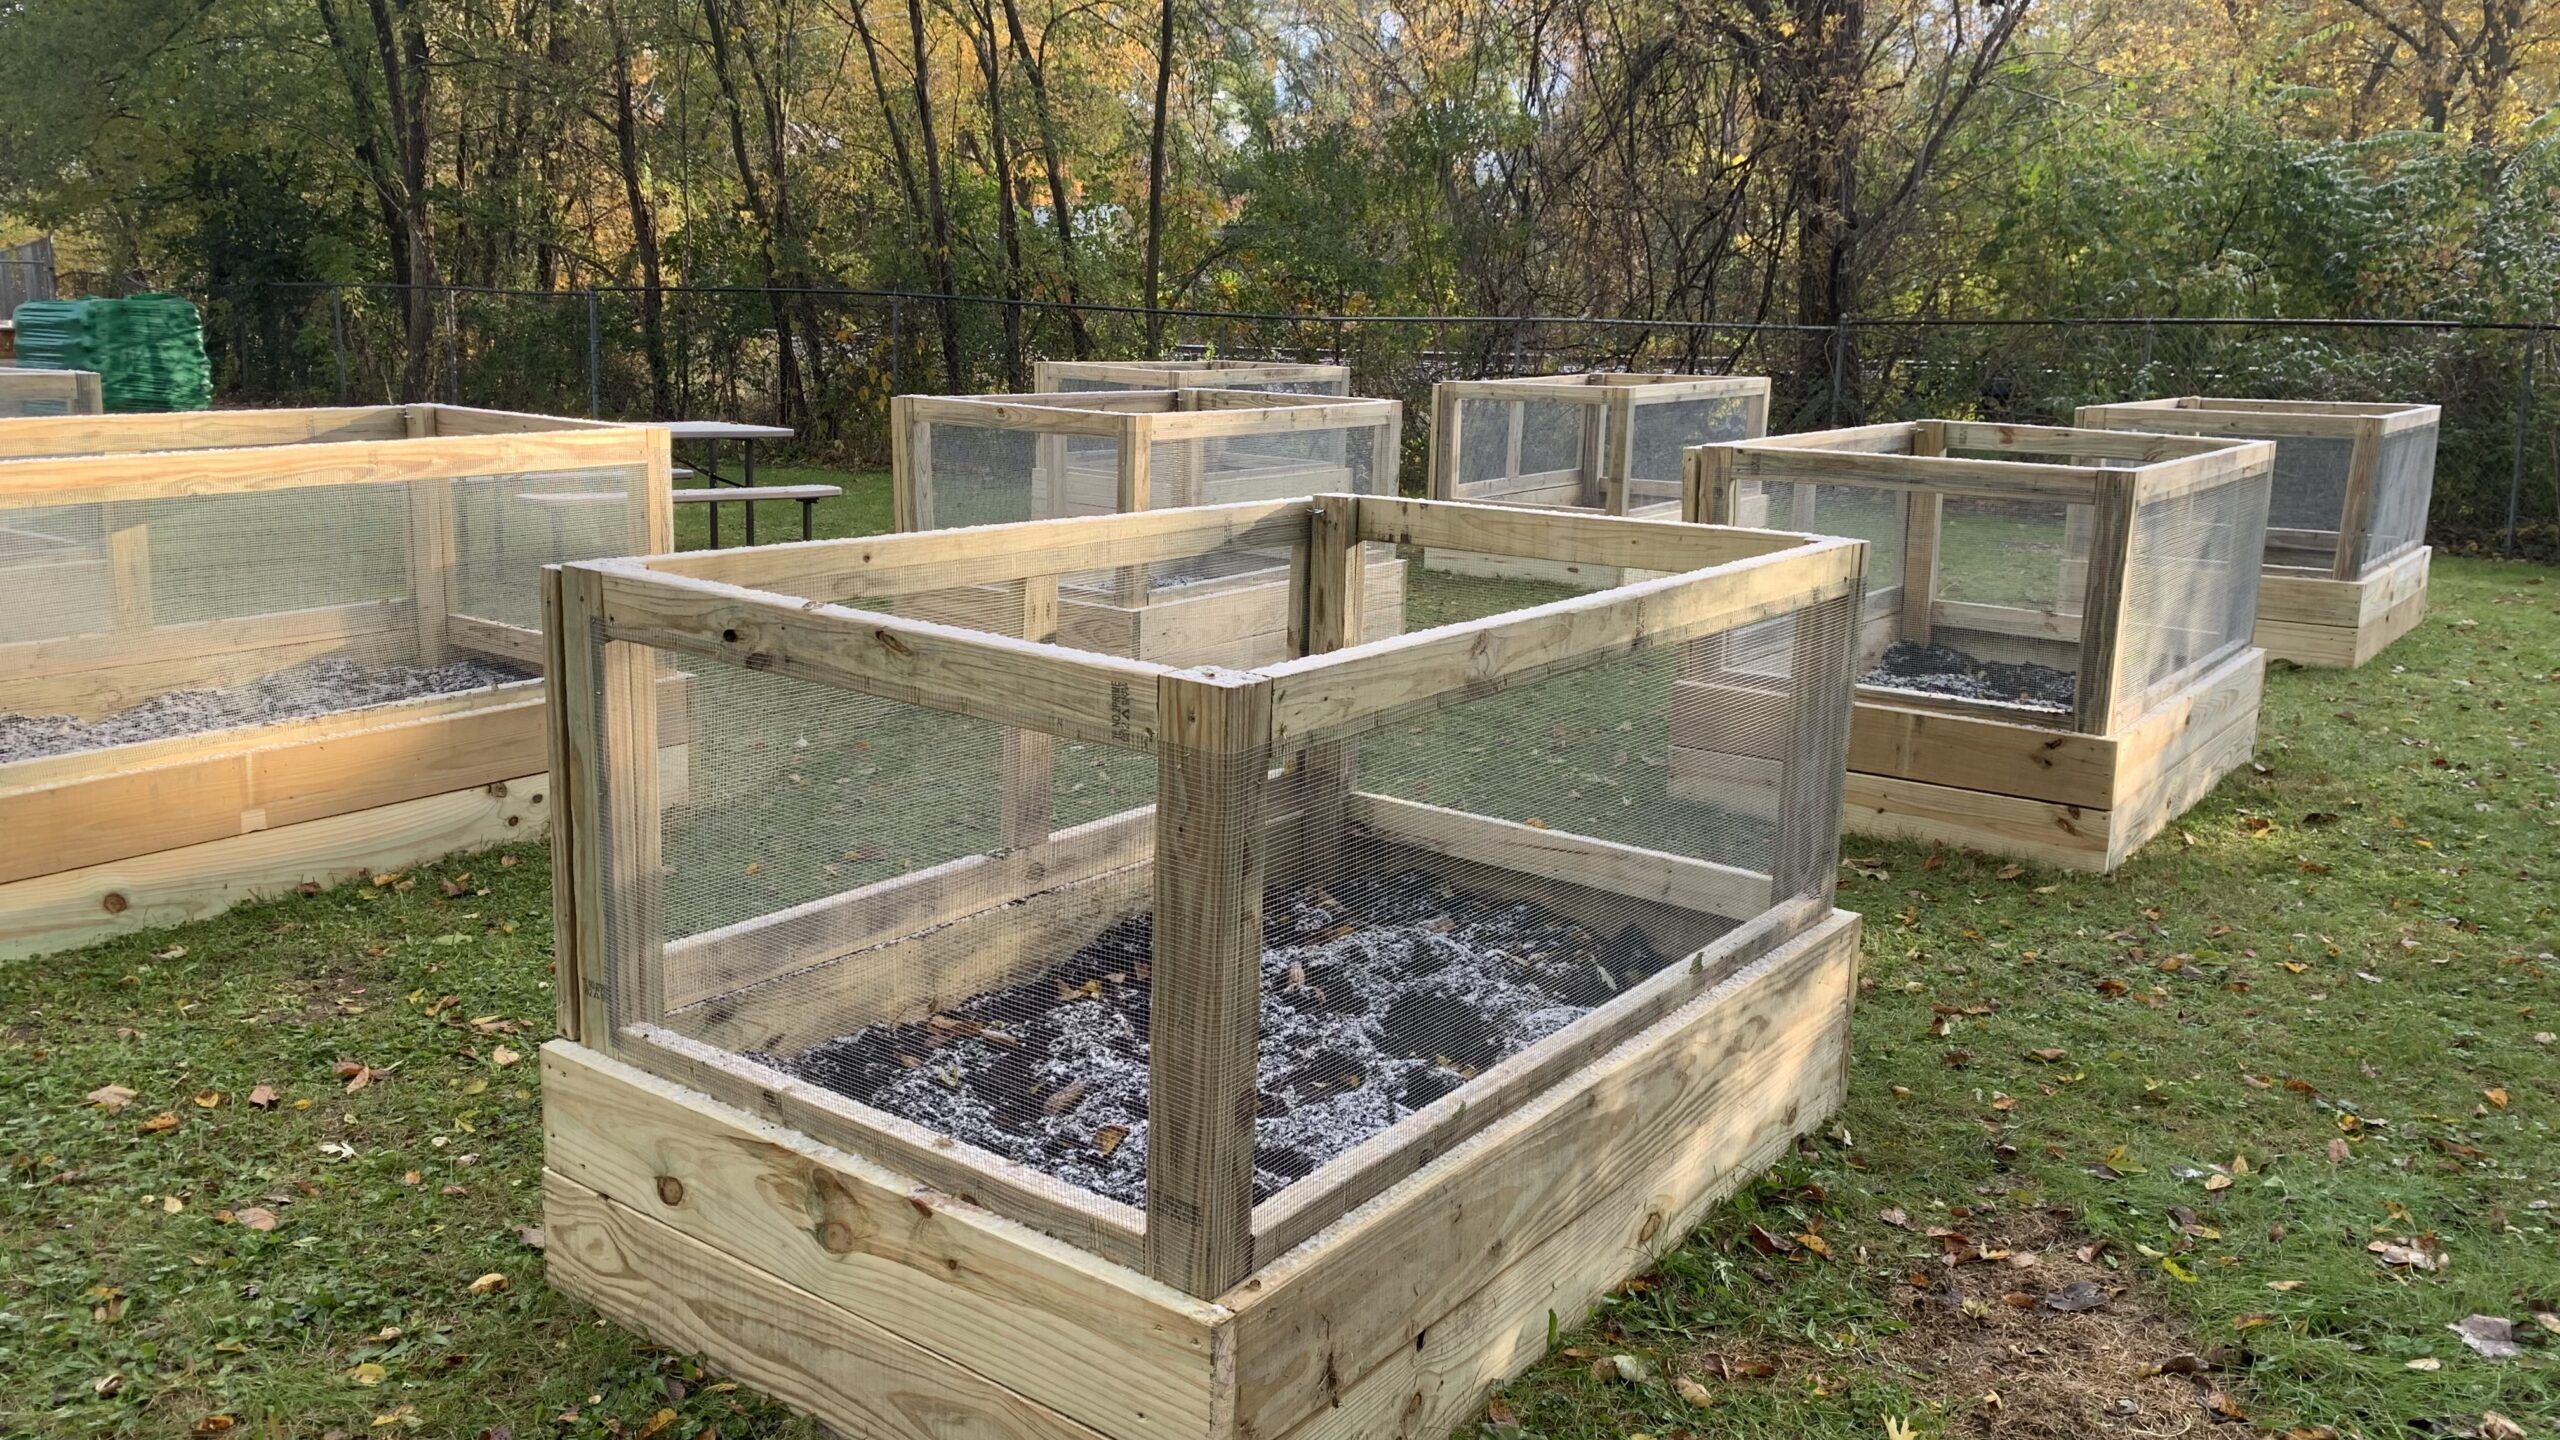 Raised beds that were completed at Keystone for the veterans staying there. The beds were put together by vets from the Portage Lowes.